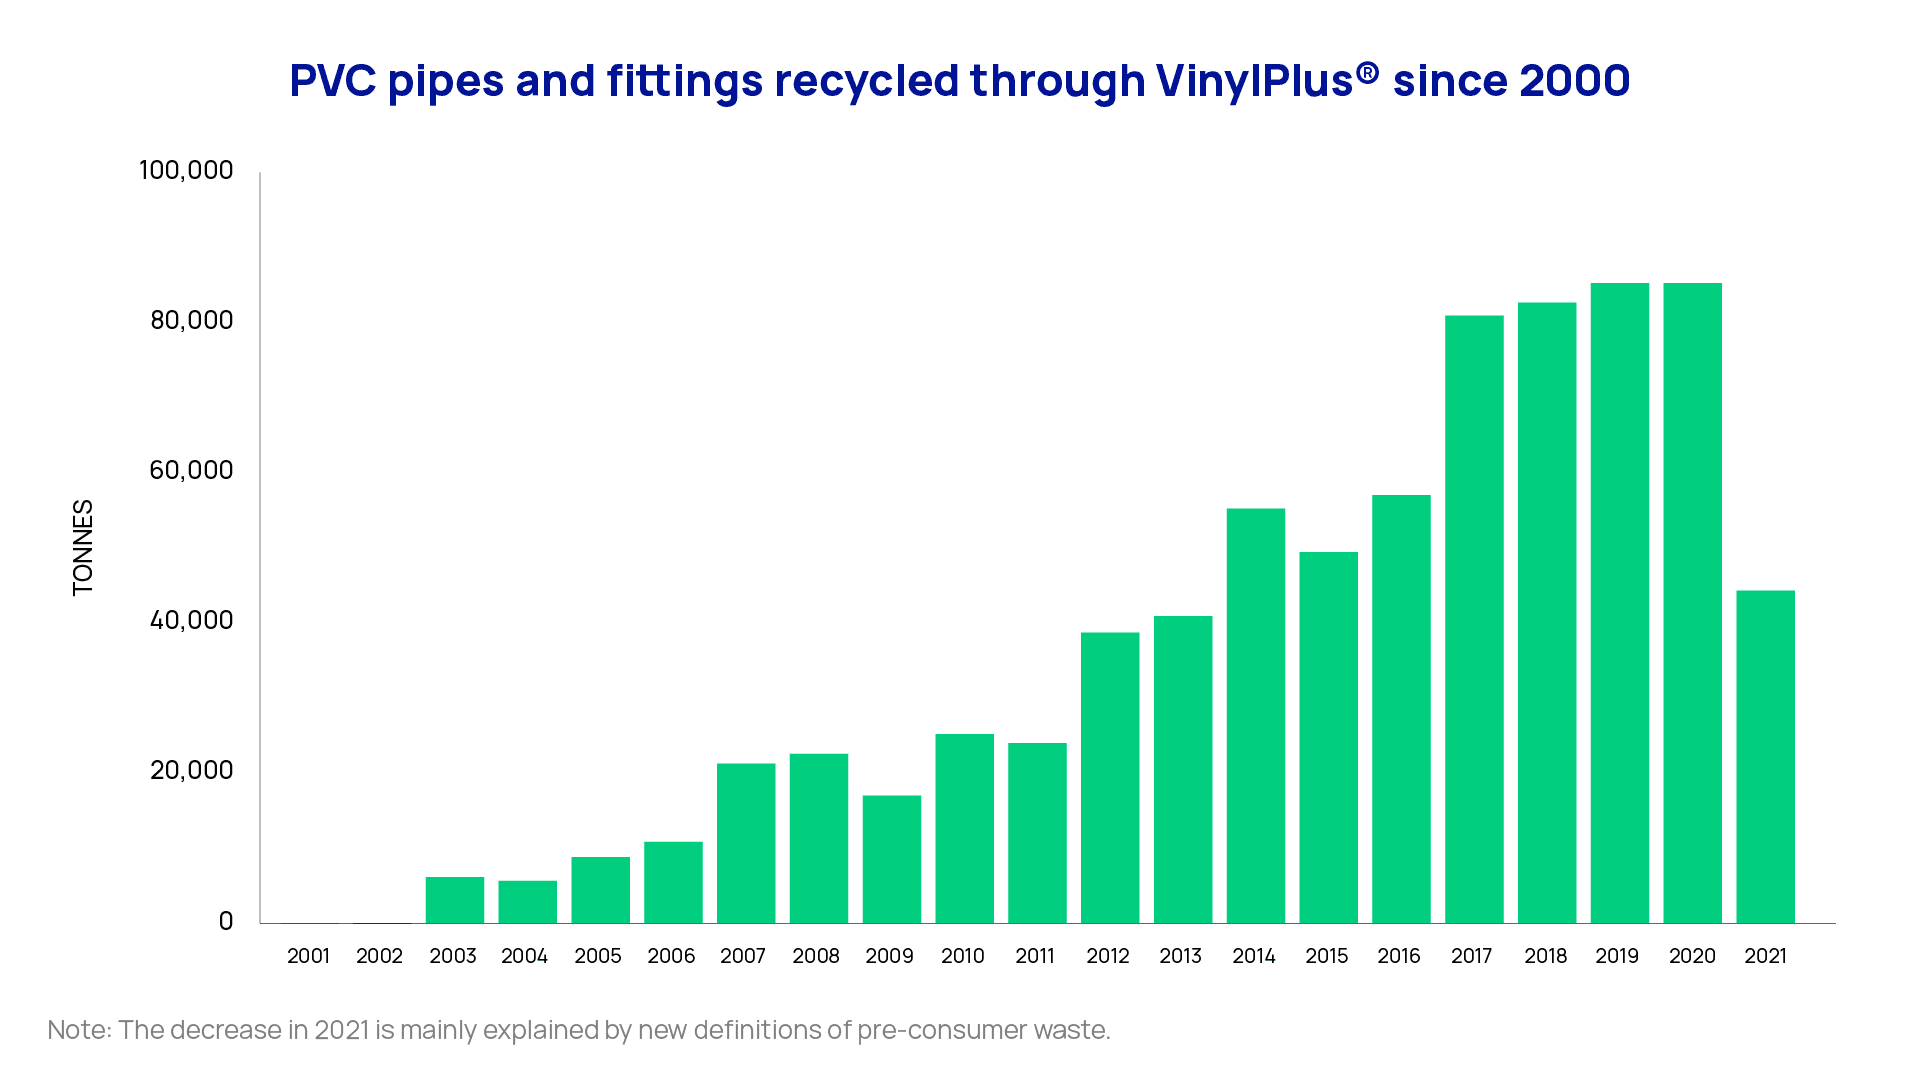 pvc pipes fittings recycled since 2000